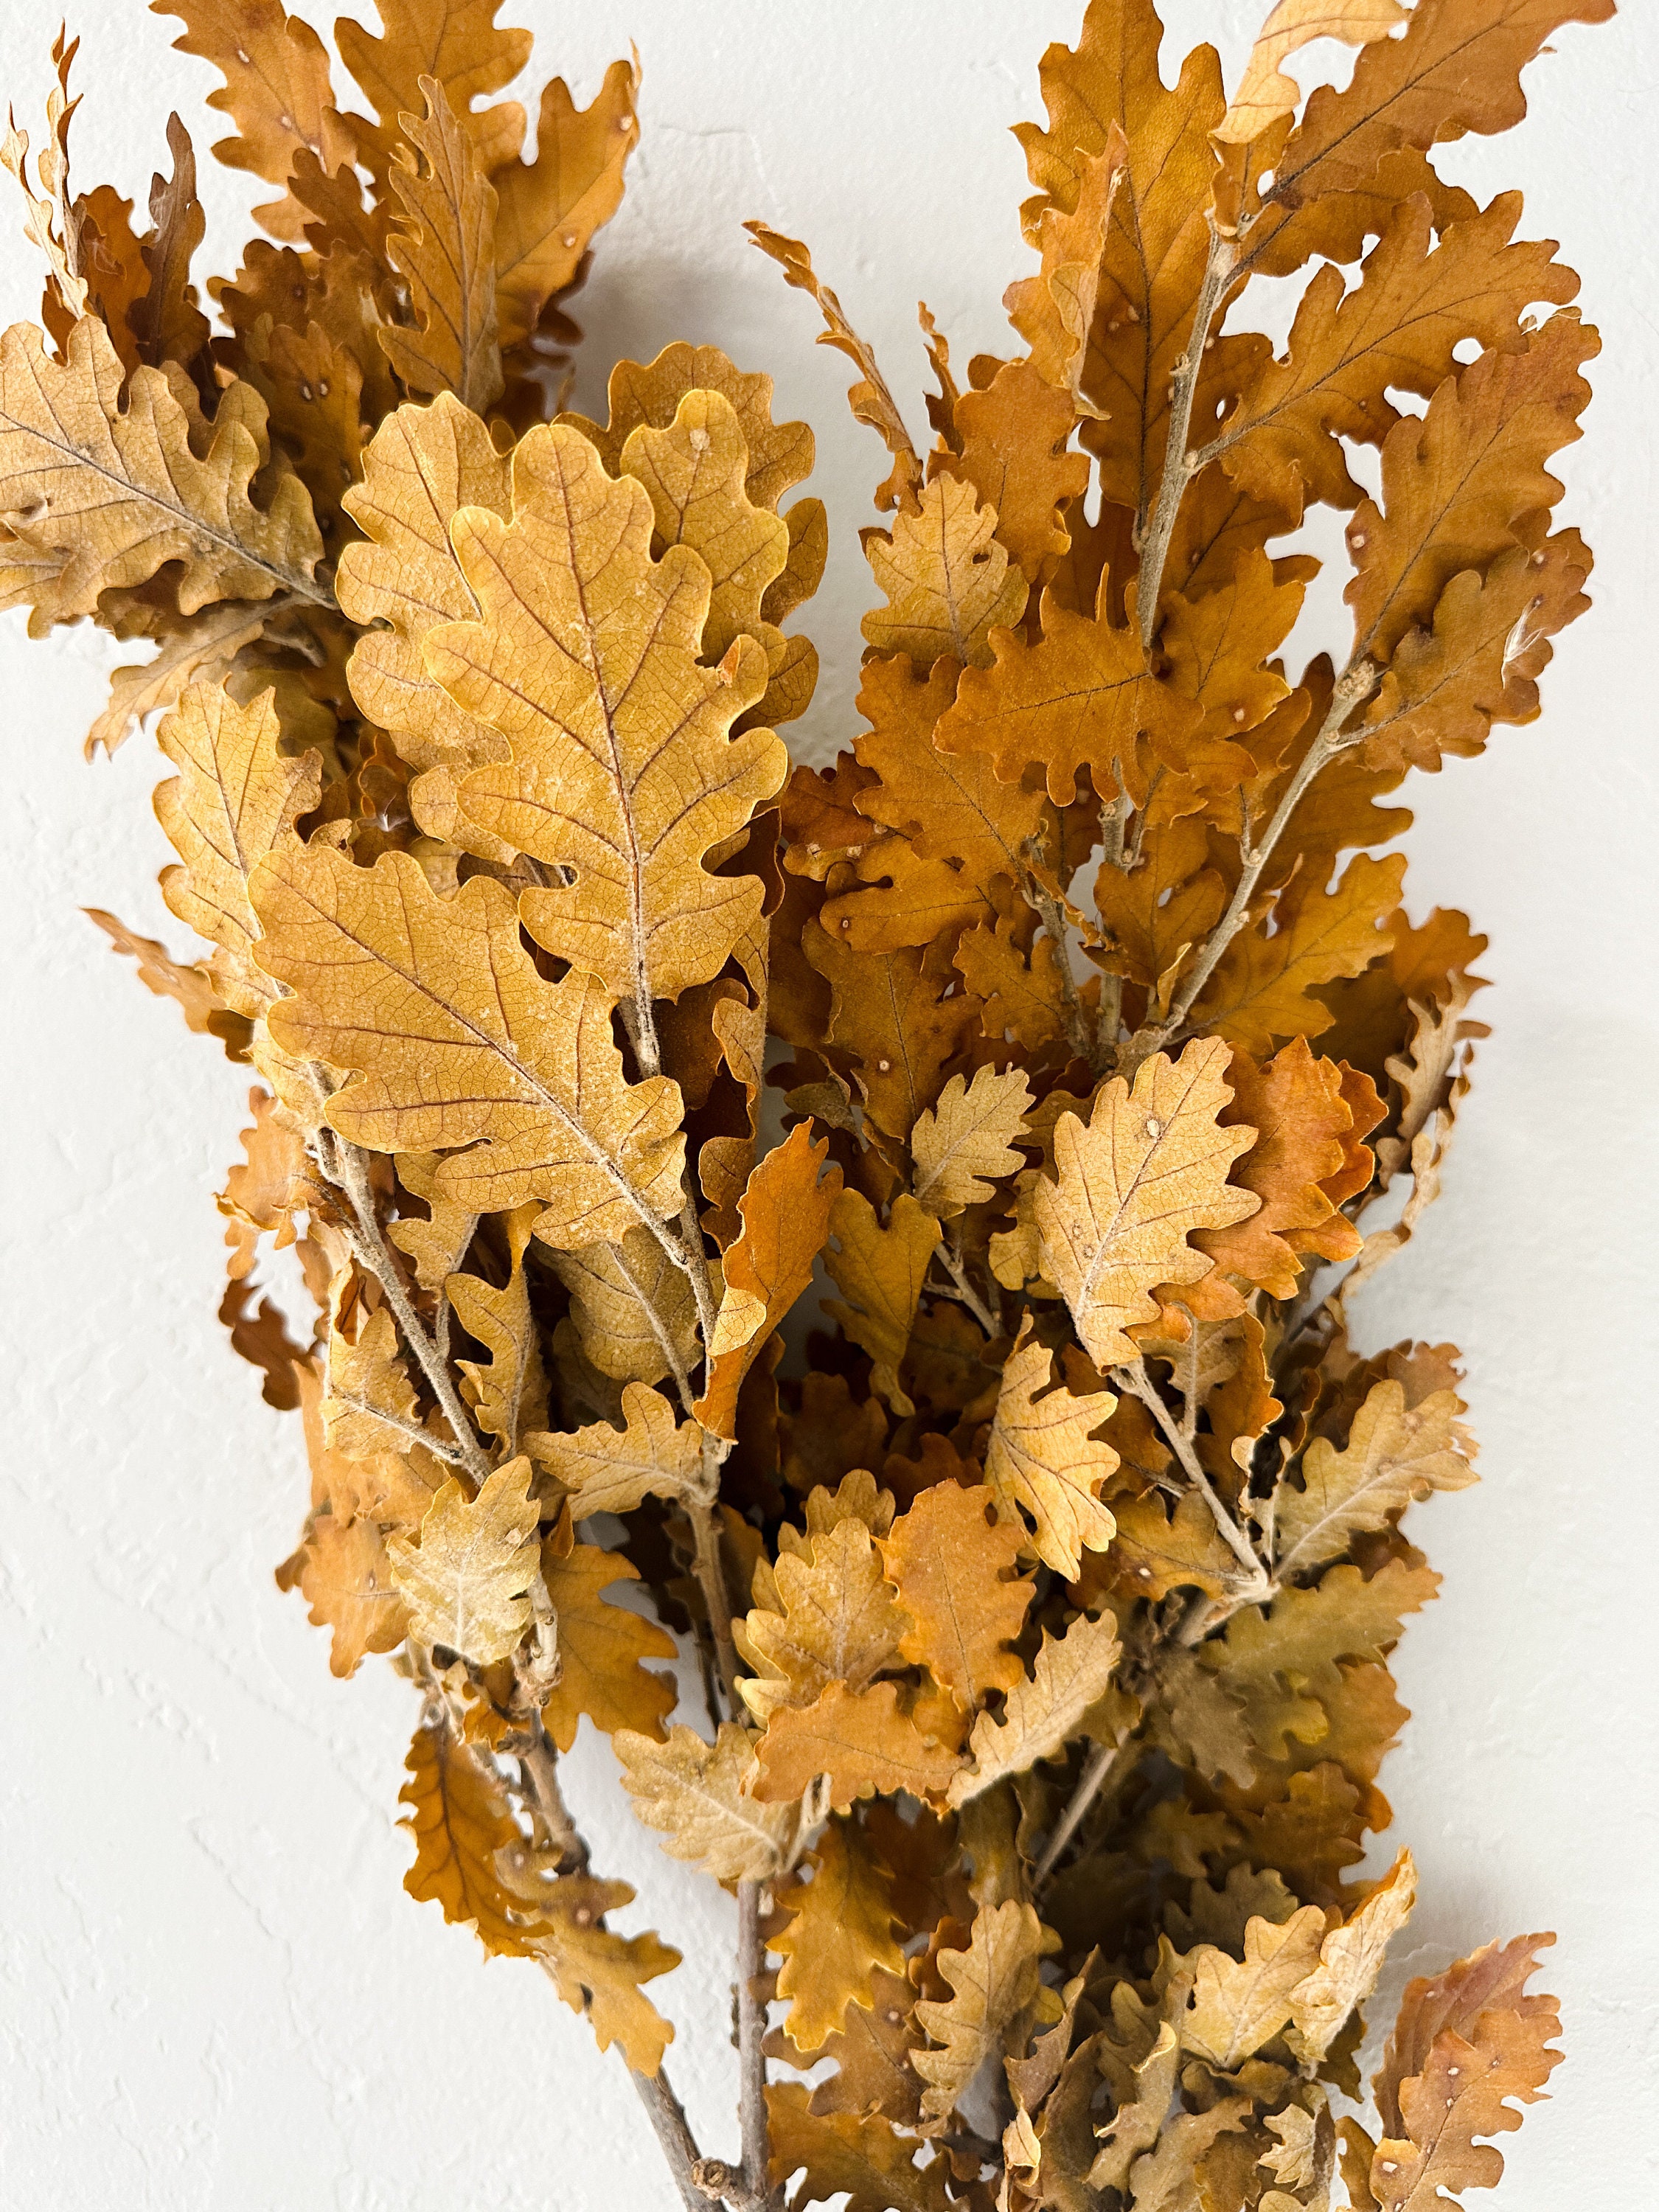 Preserved Fall Oak Leaves in Red - 1 lb Package